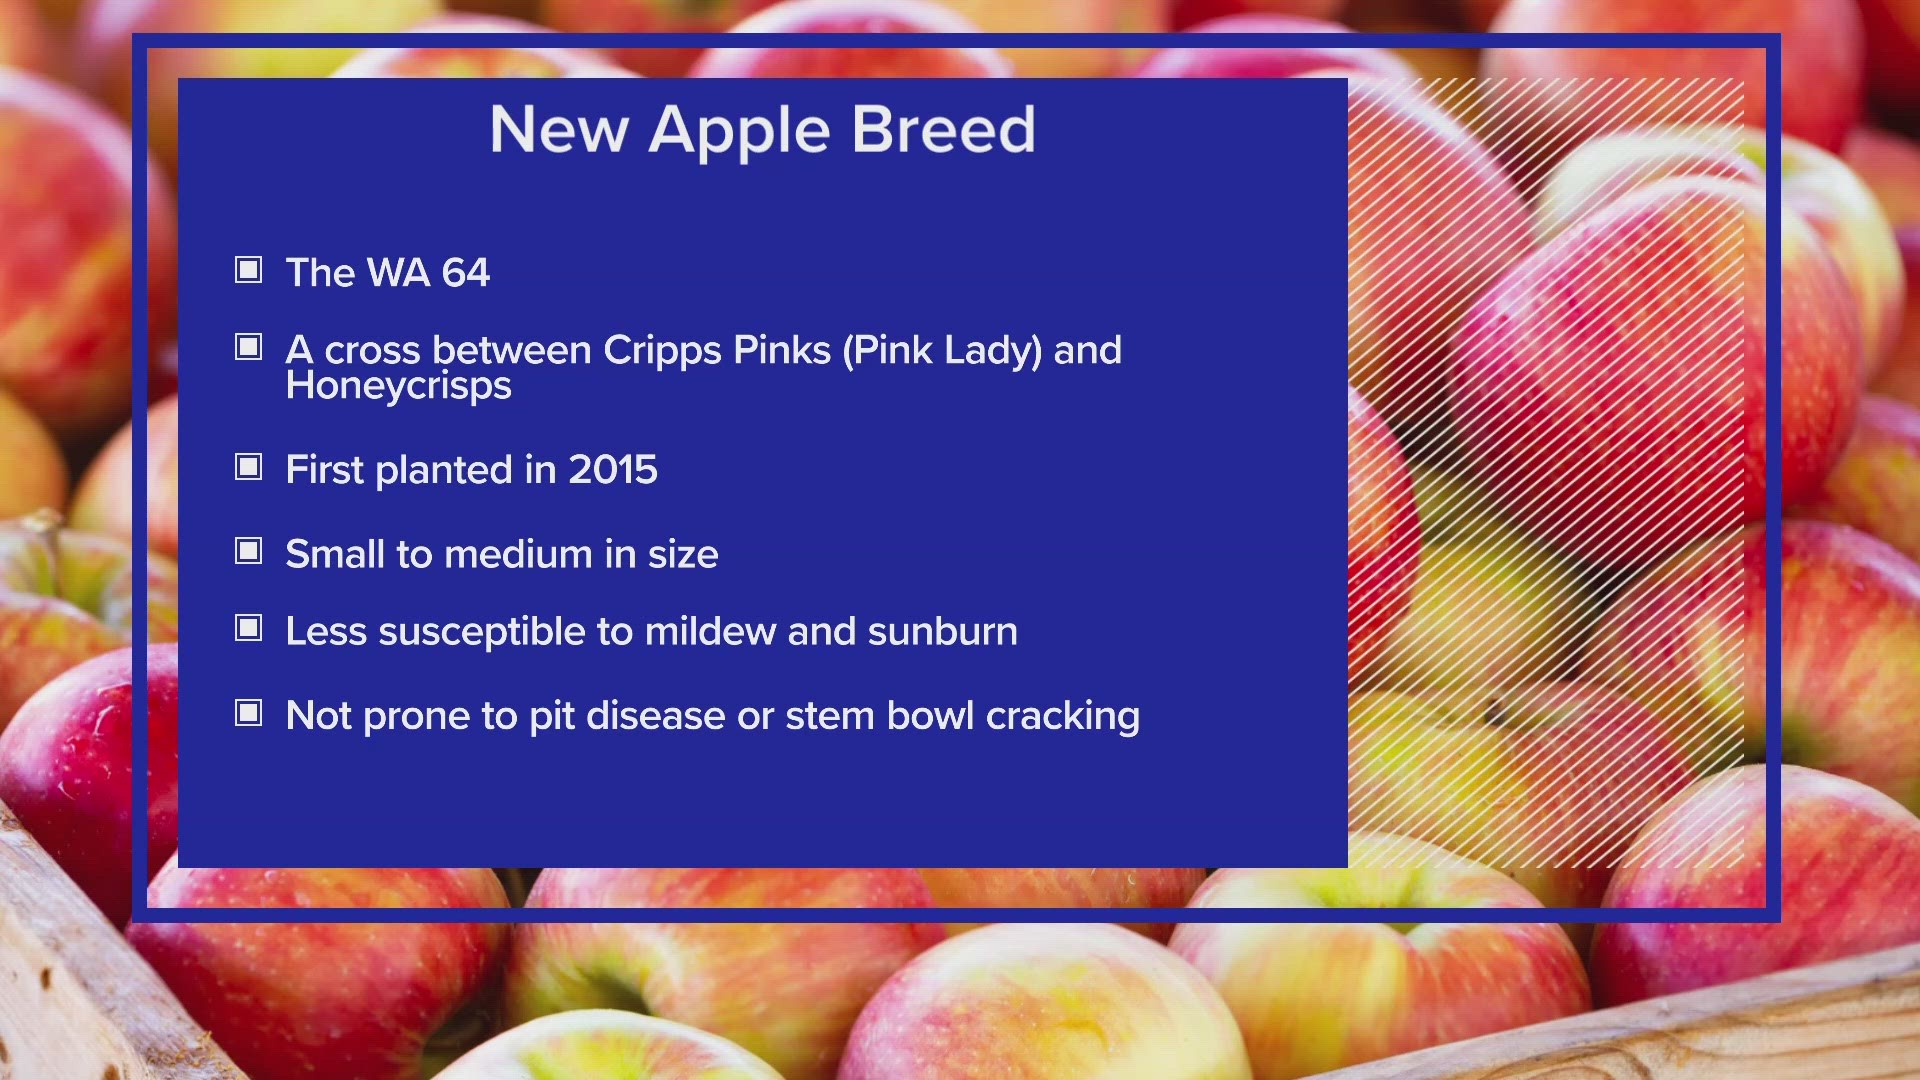 Washington State University is asking for help naming the new variety of apple which is described as "tart and sweet, firm, crisp, and juicy."